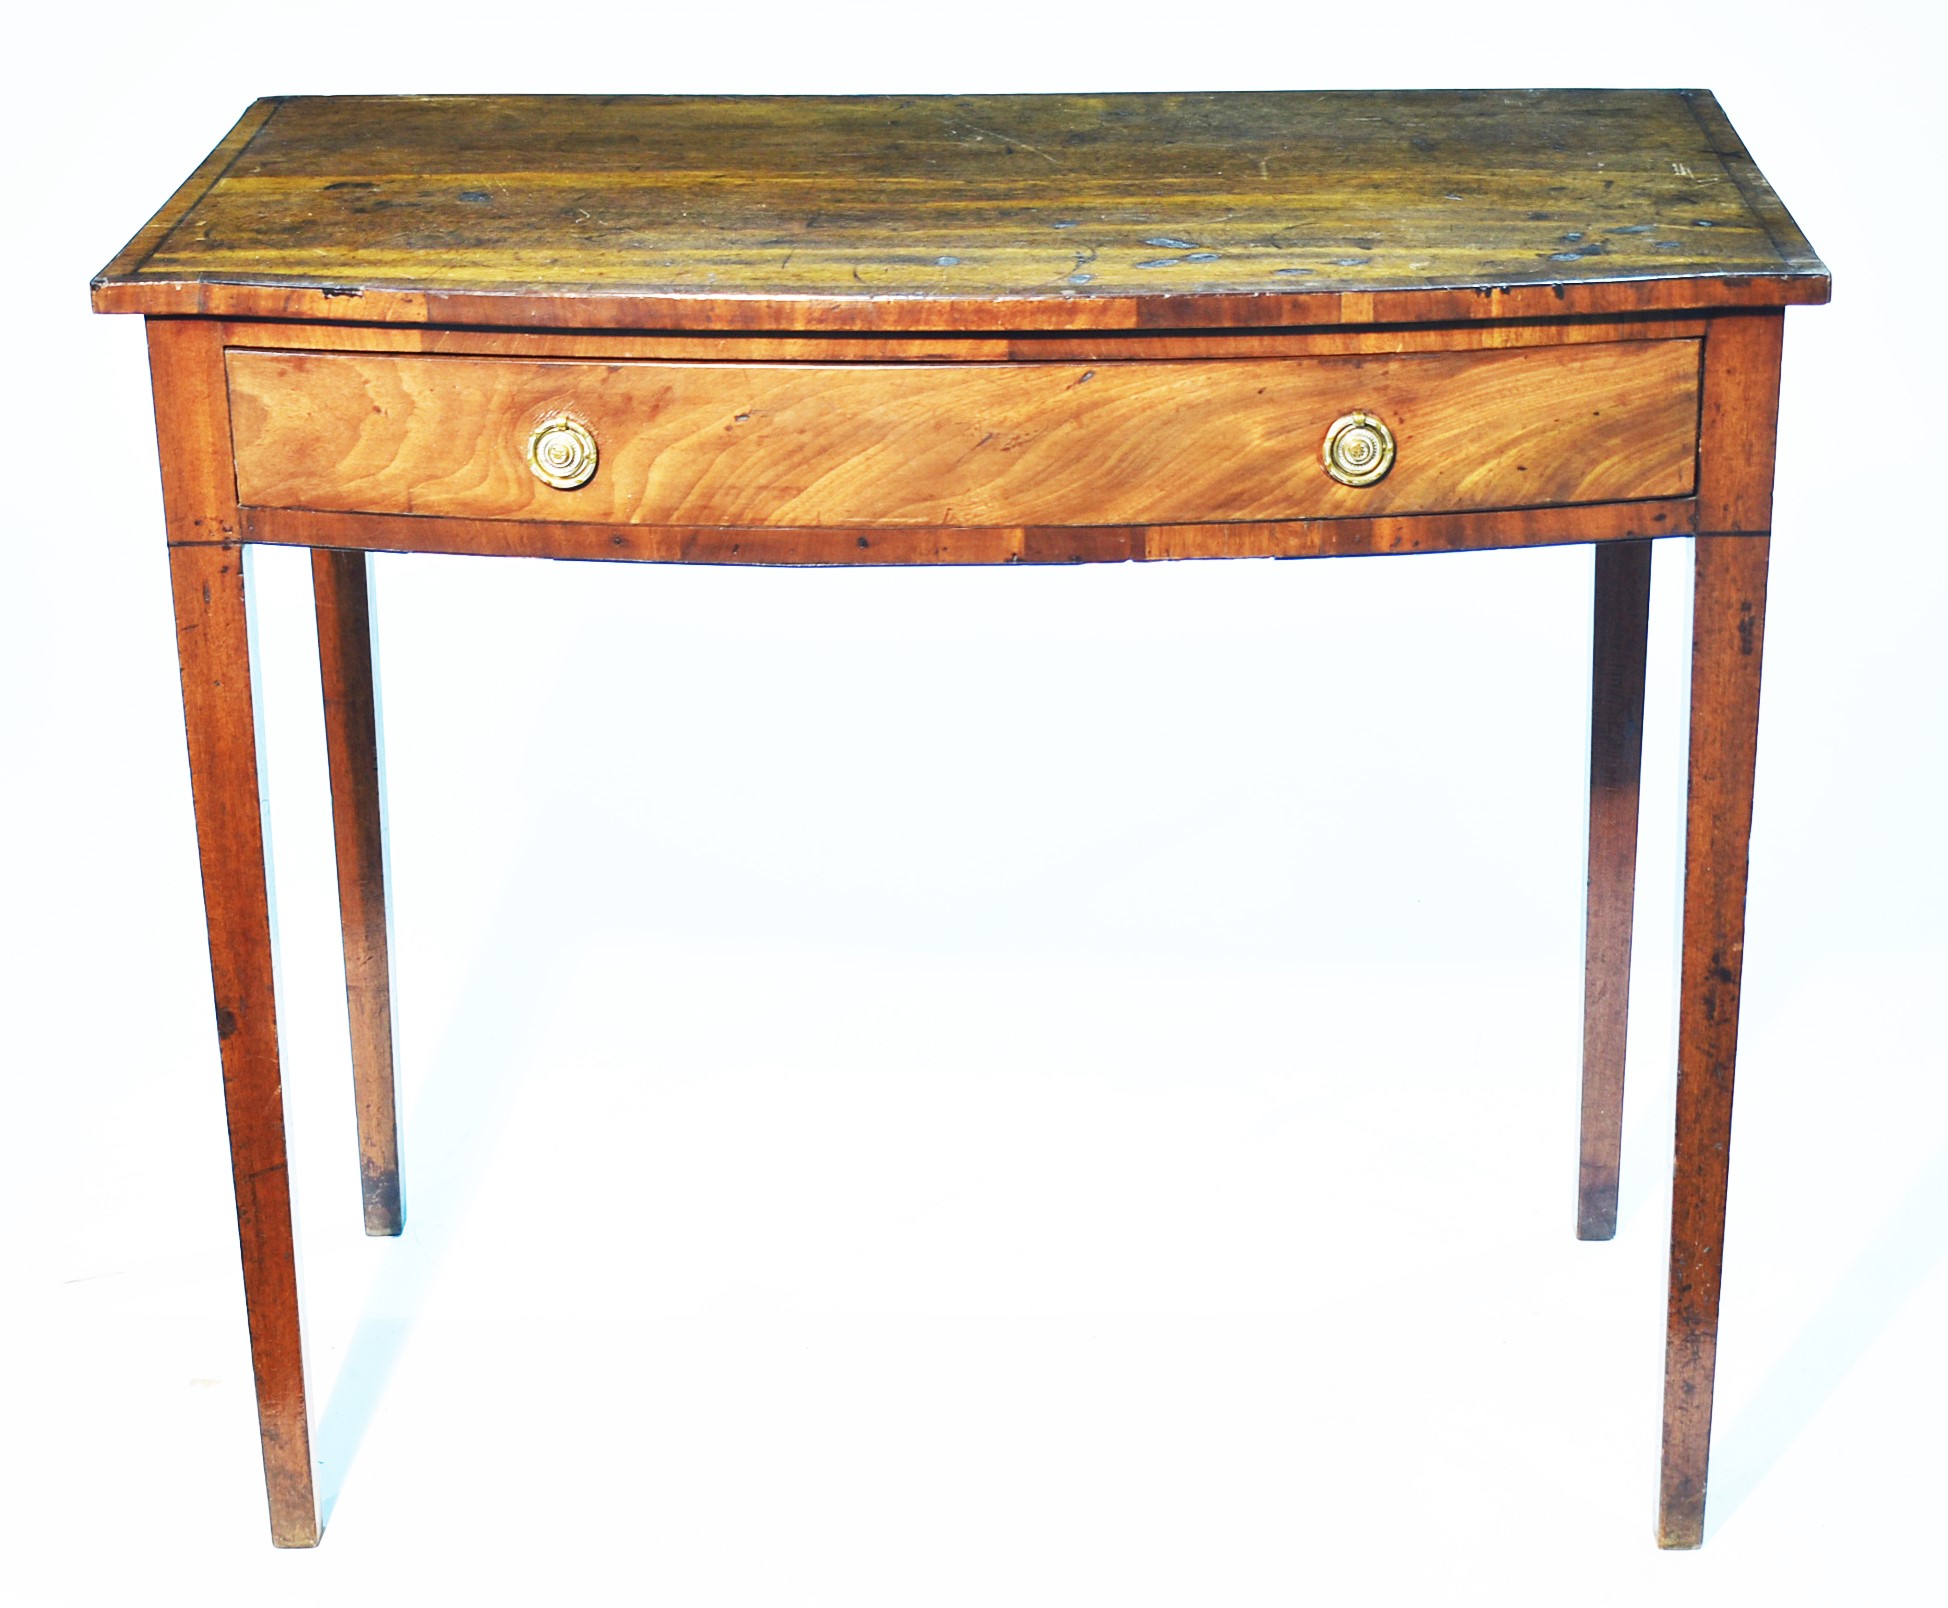 A George III mahogany and banded bowfront side table